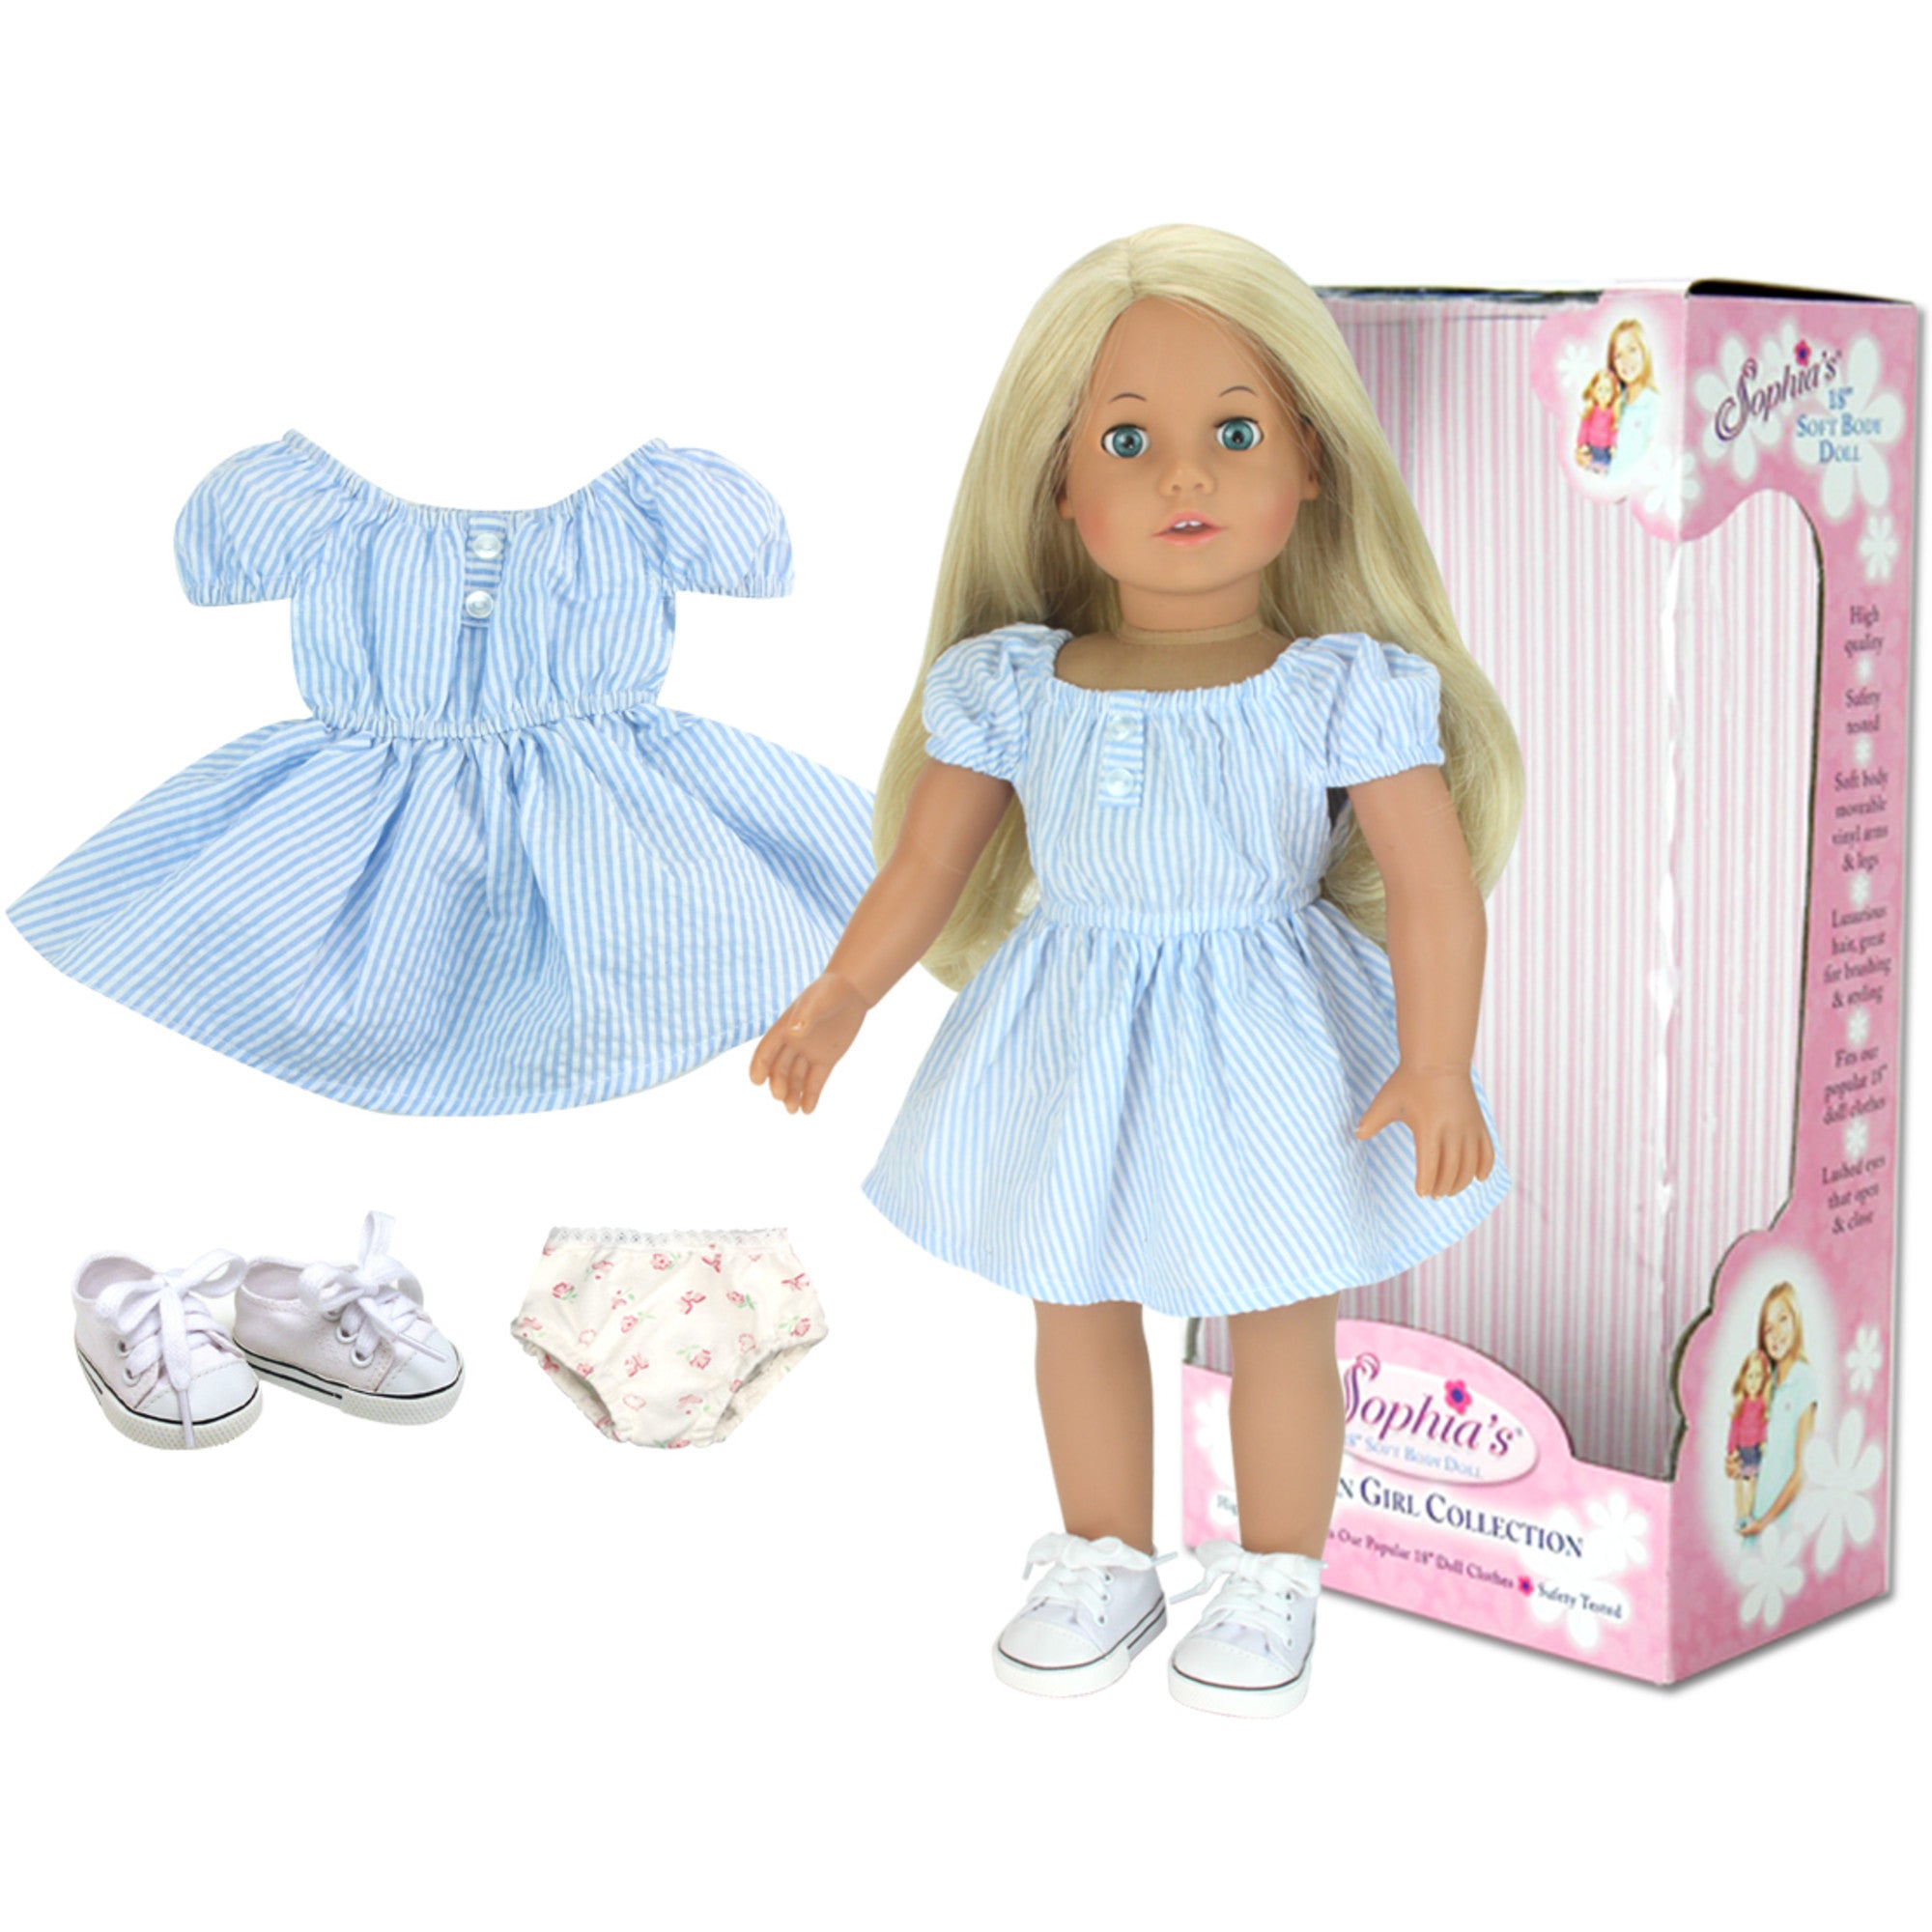 Sophia's Posable 18'' Soft Bodied Vinyl Doll "Sophia" with Blonde Hair and Blue Eyes, Light Skin Tone